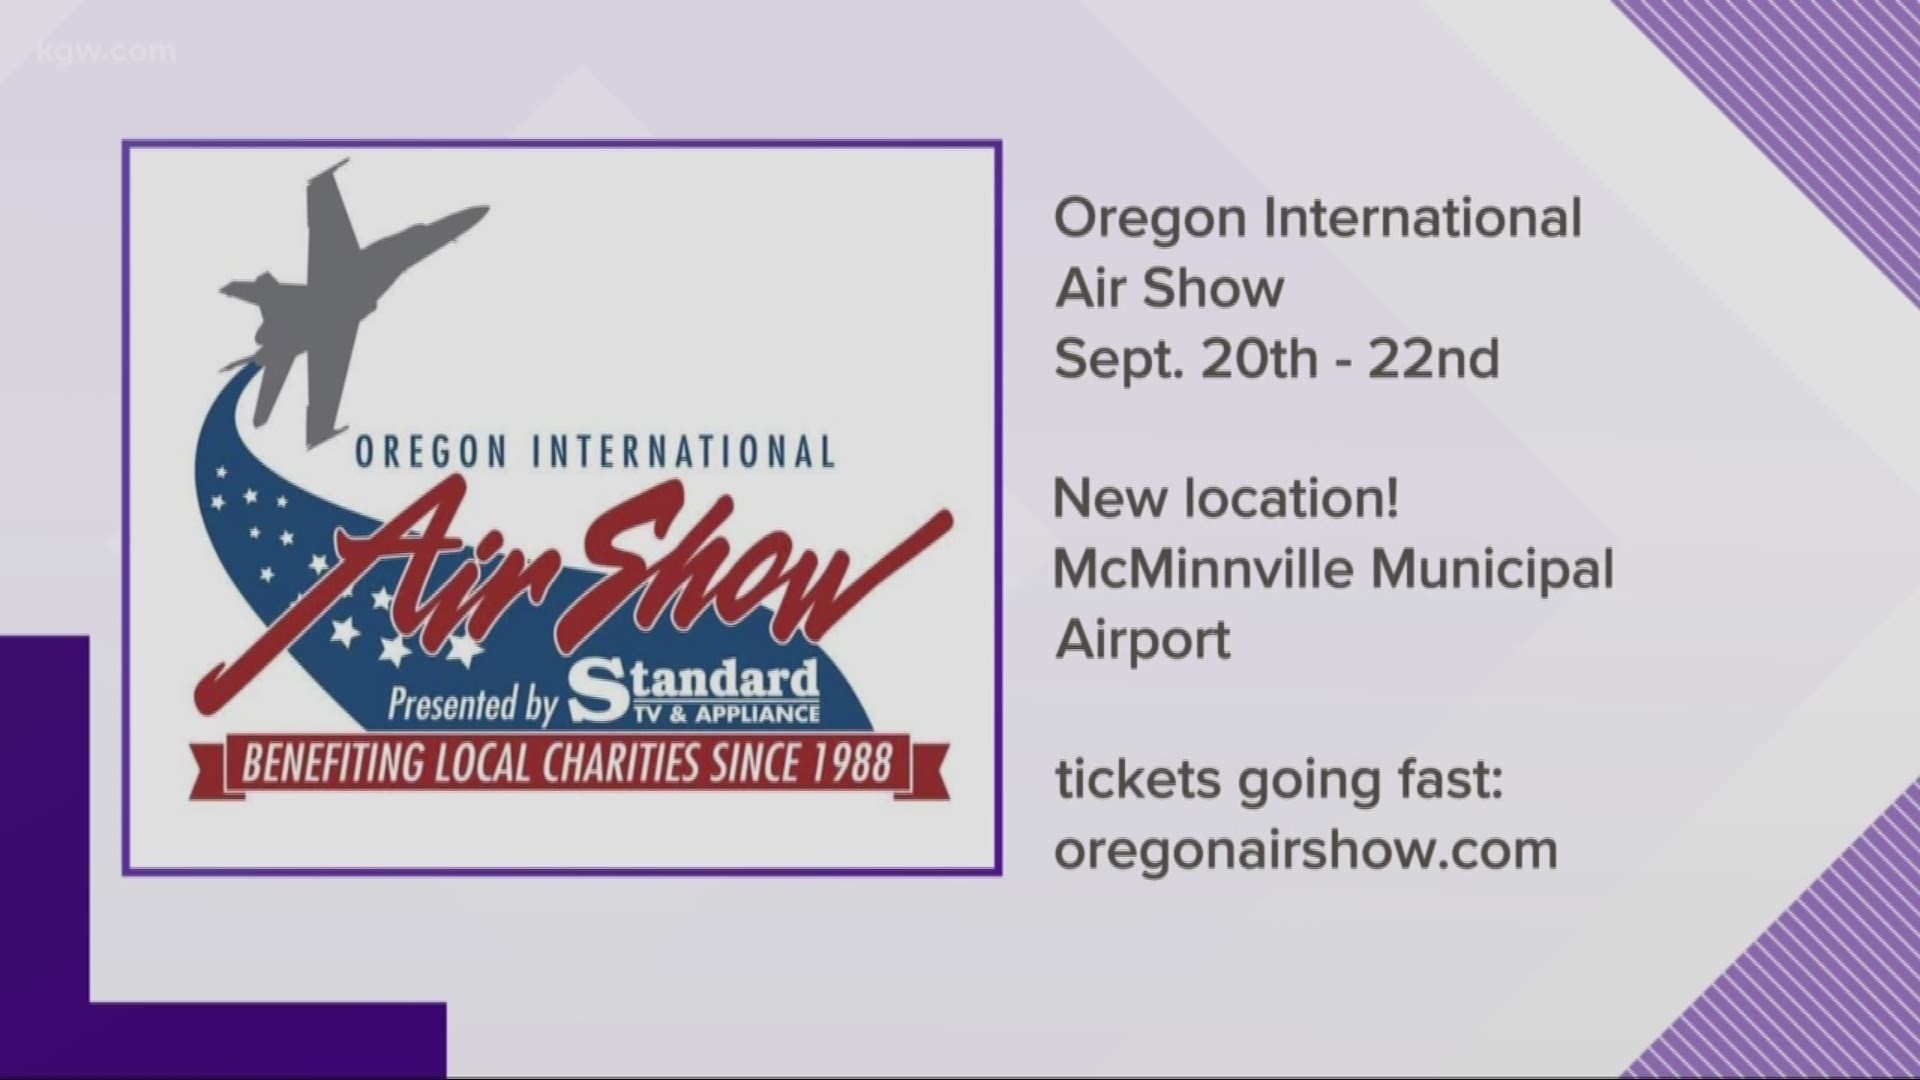 This year's Oregon International Air Show is in McMinnville and will feature the Royal Air Force Red Arrows aerobatic jet team. Tickets are already going fast!
oregonairshow.com
#TonightwithCassidy